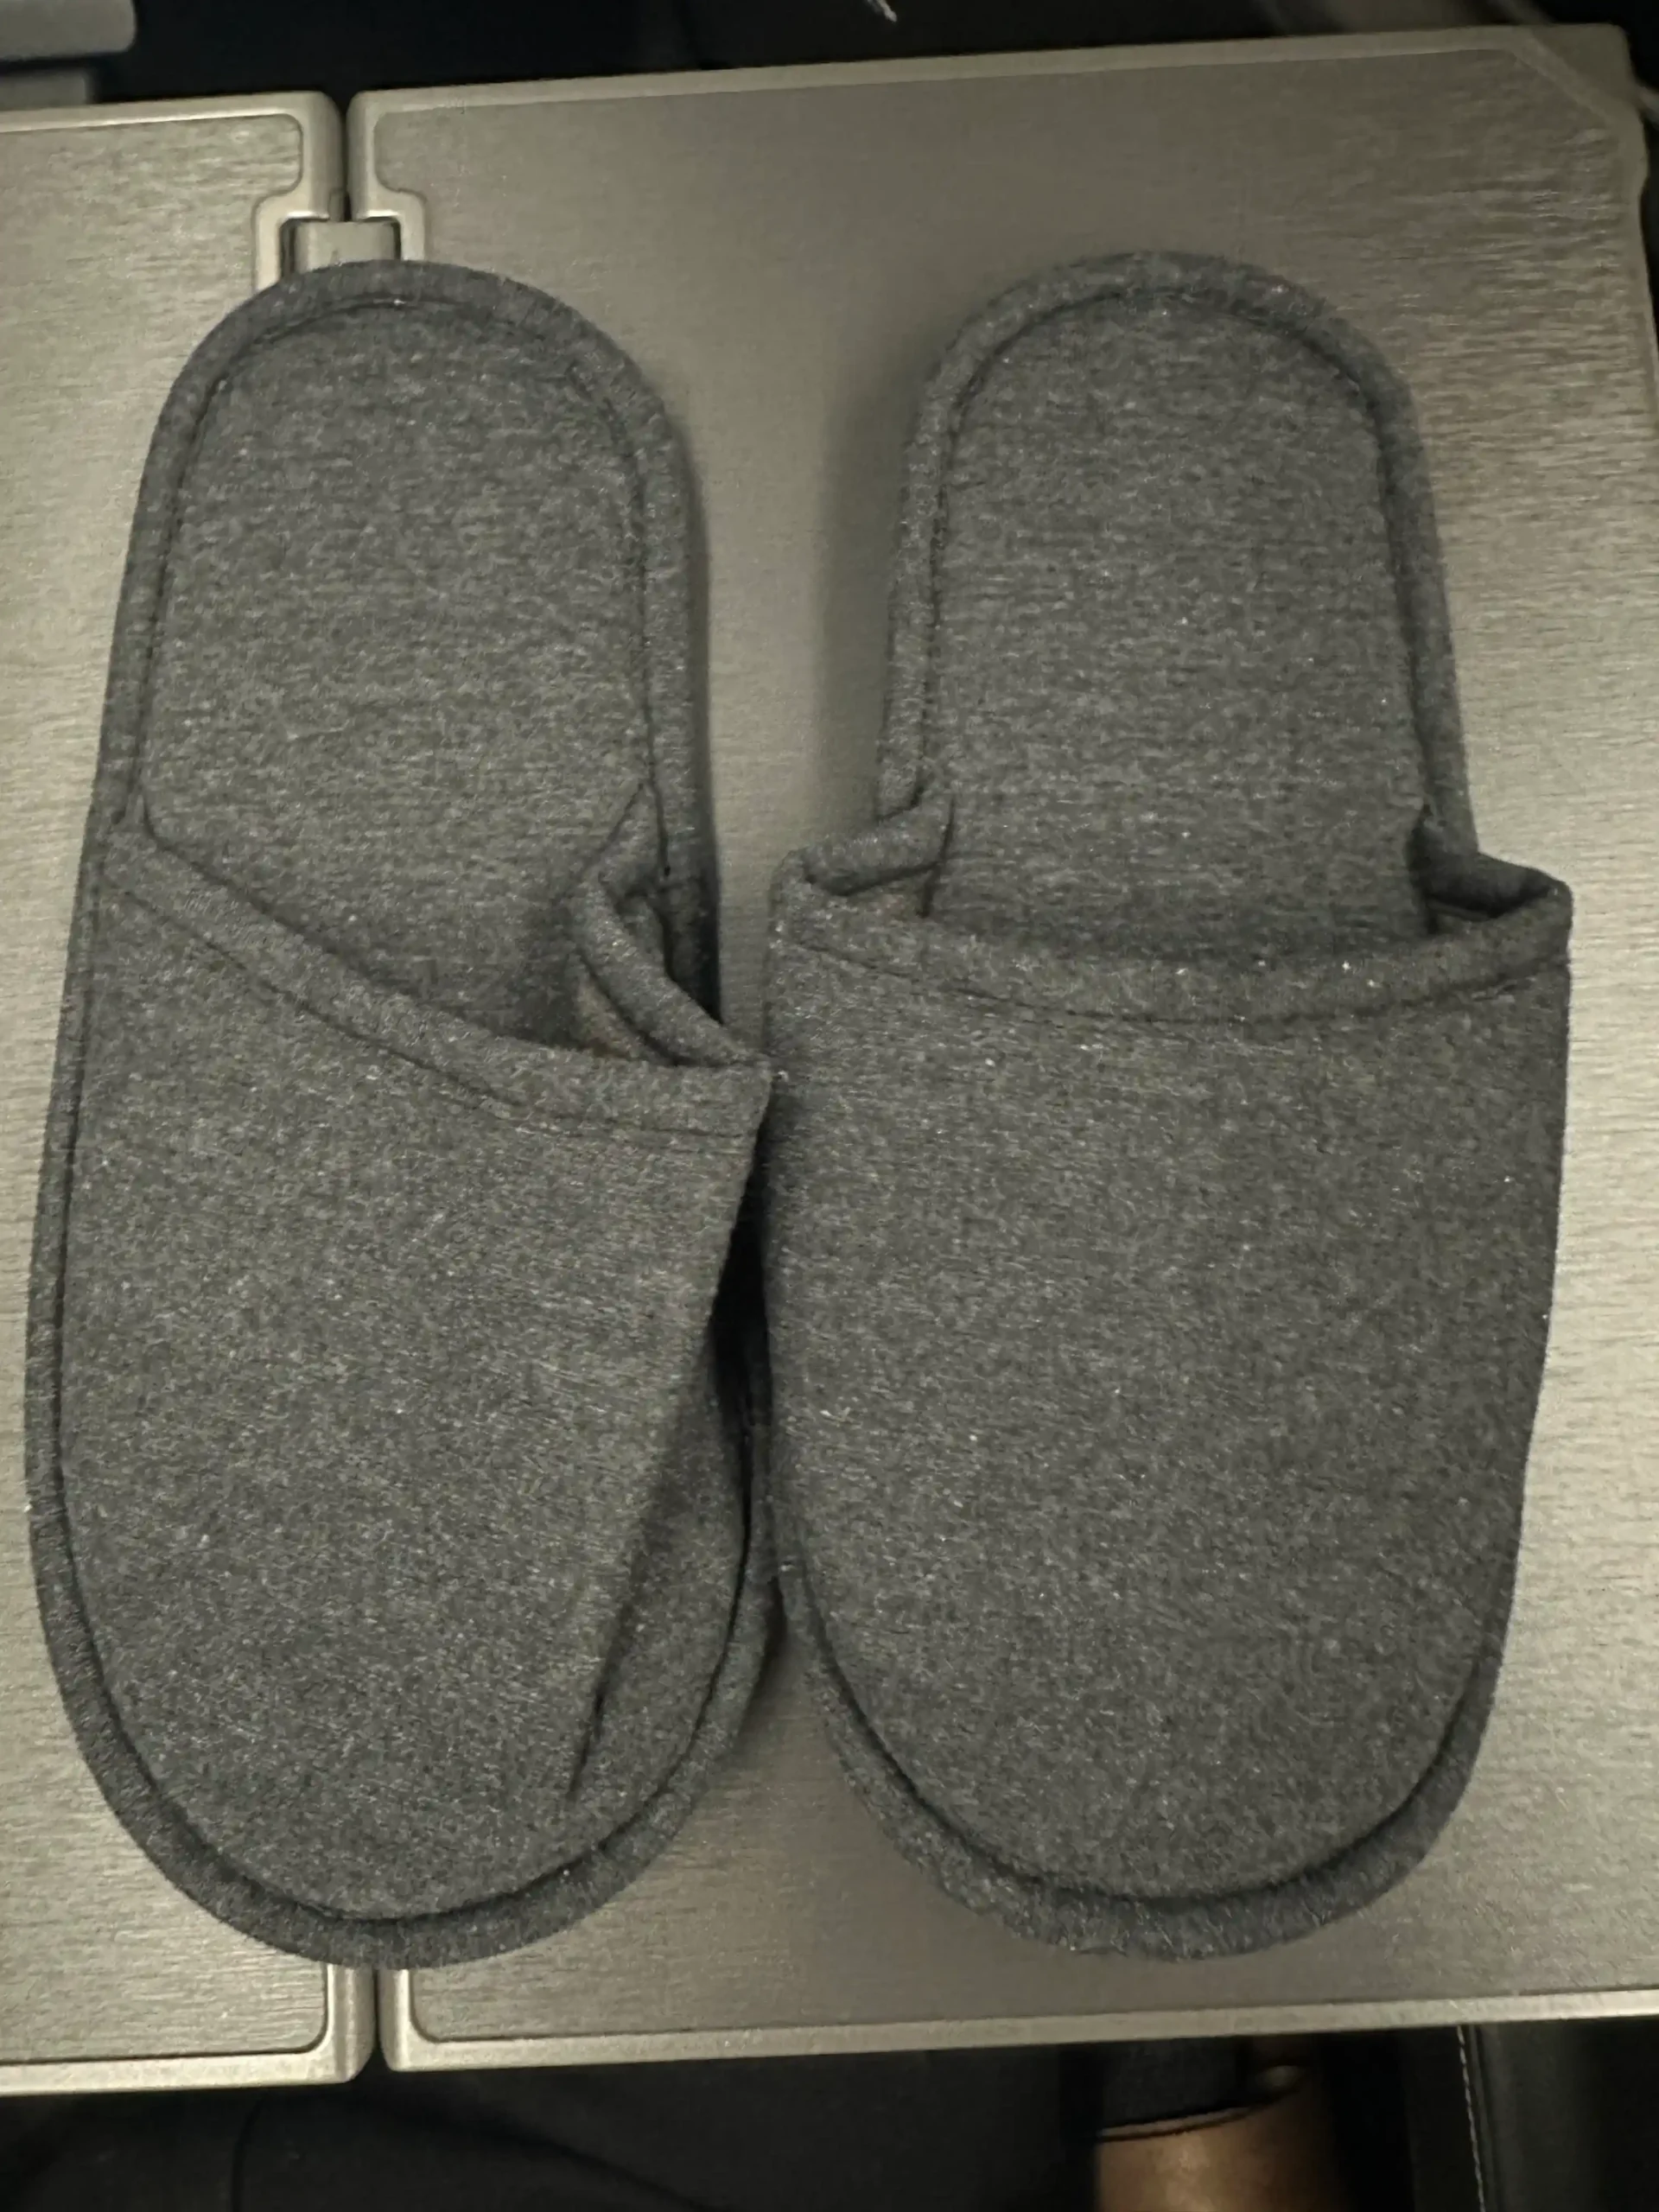 a pair of slippers on a table